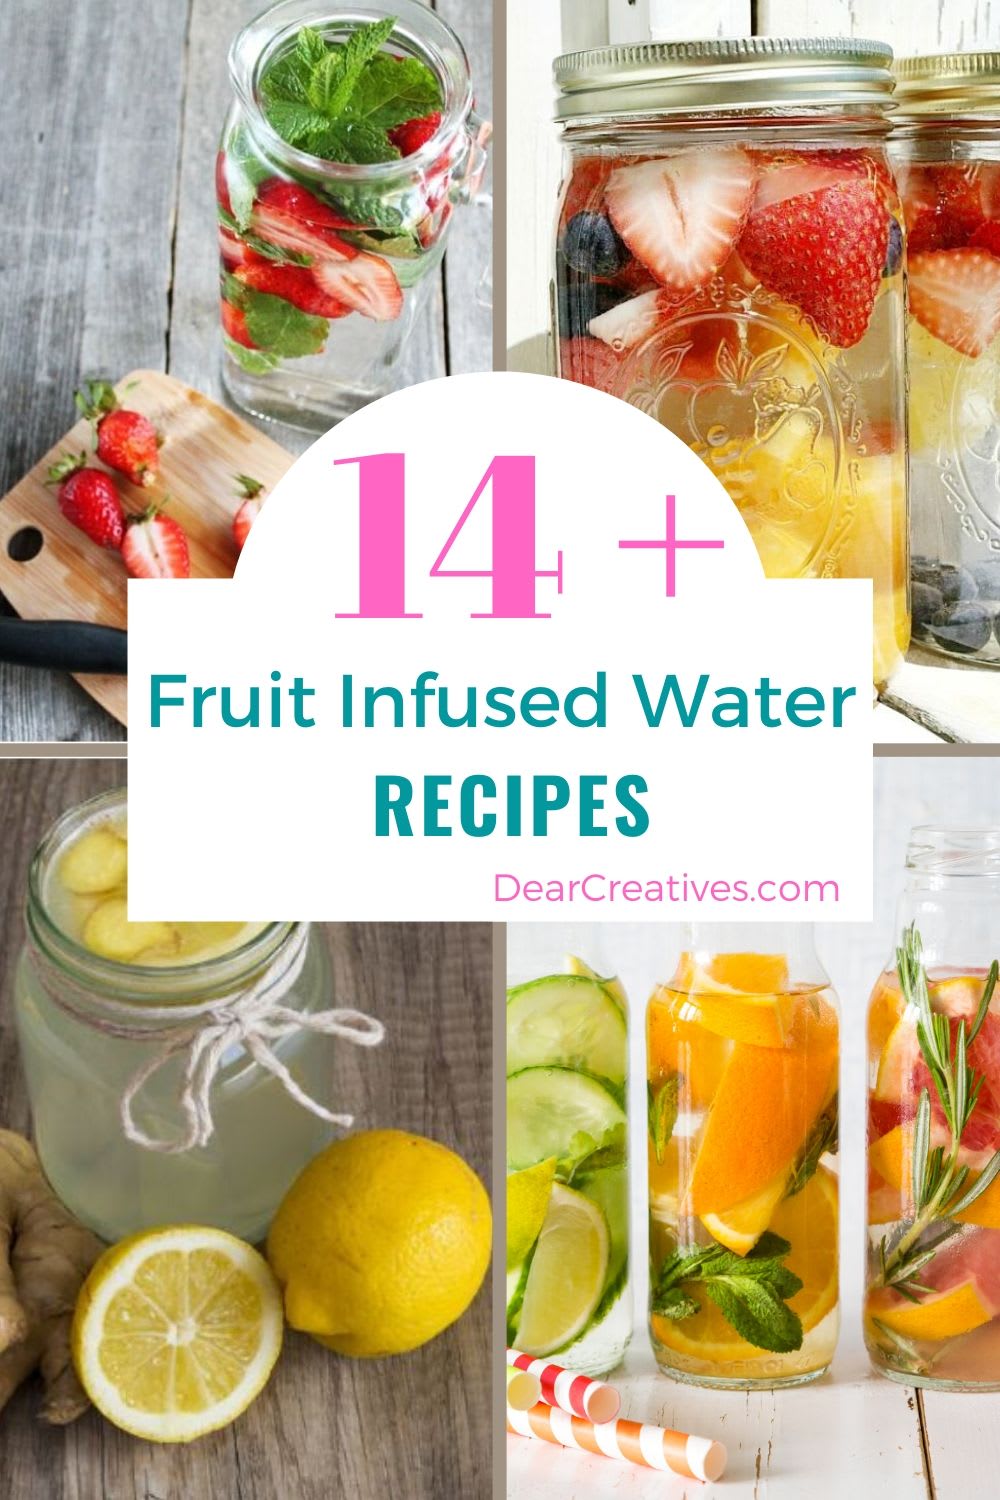 14 Fruit Infused Water Recipes